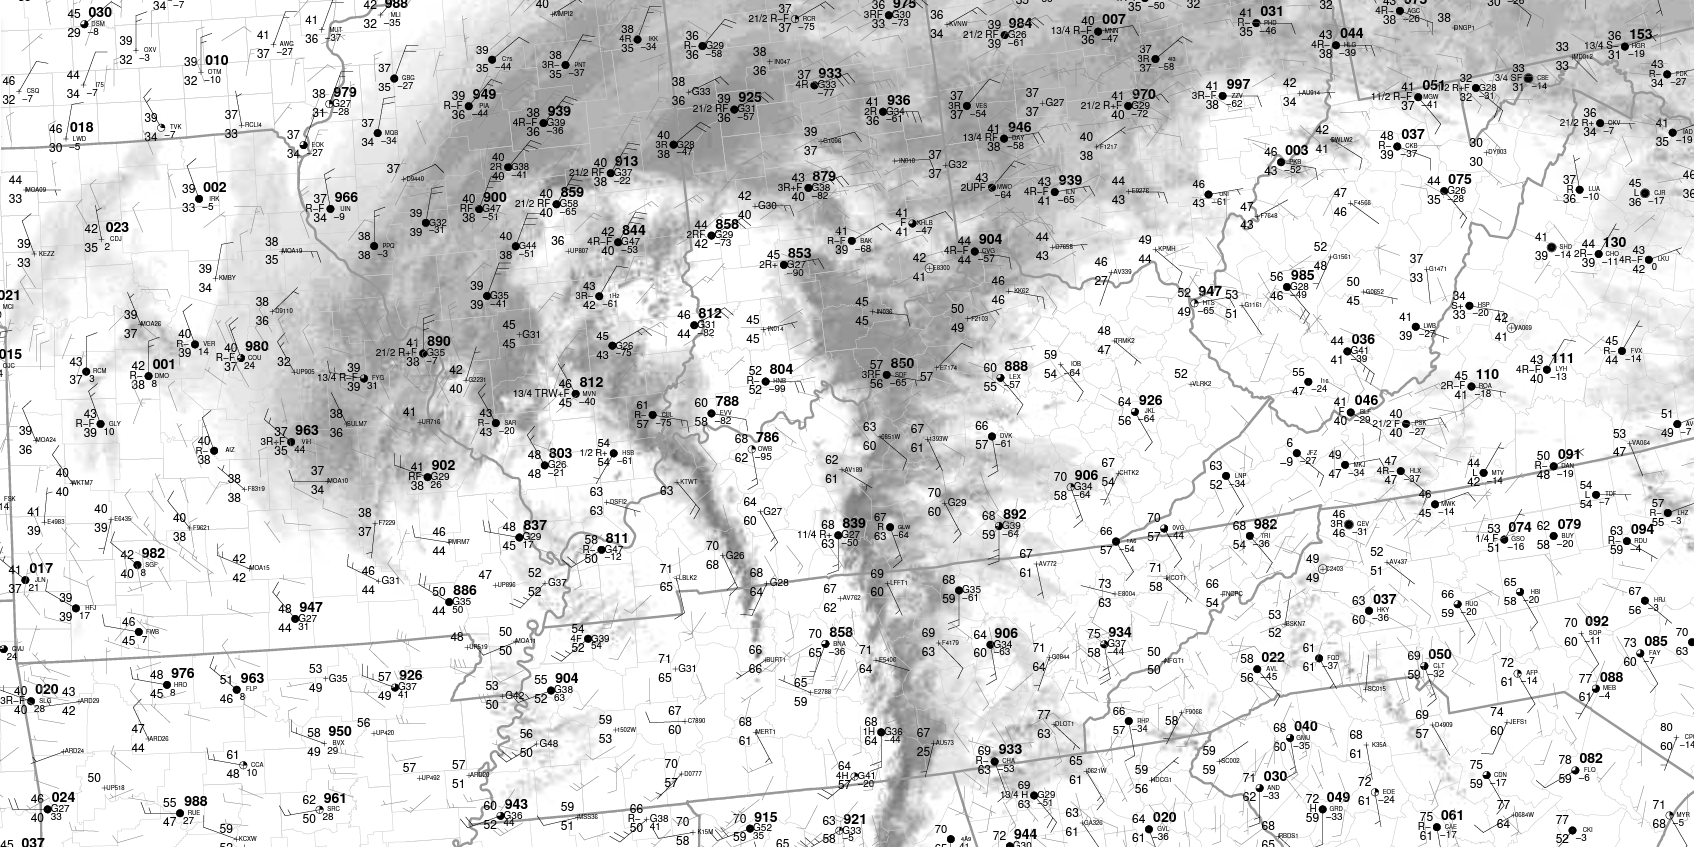 Ohio Valley surface map at 1pm EST